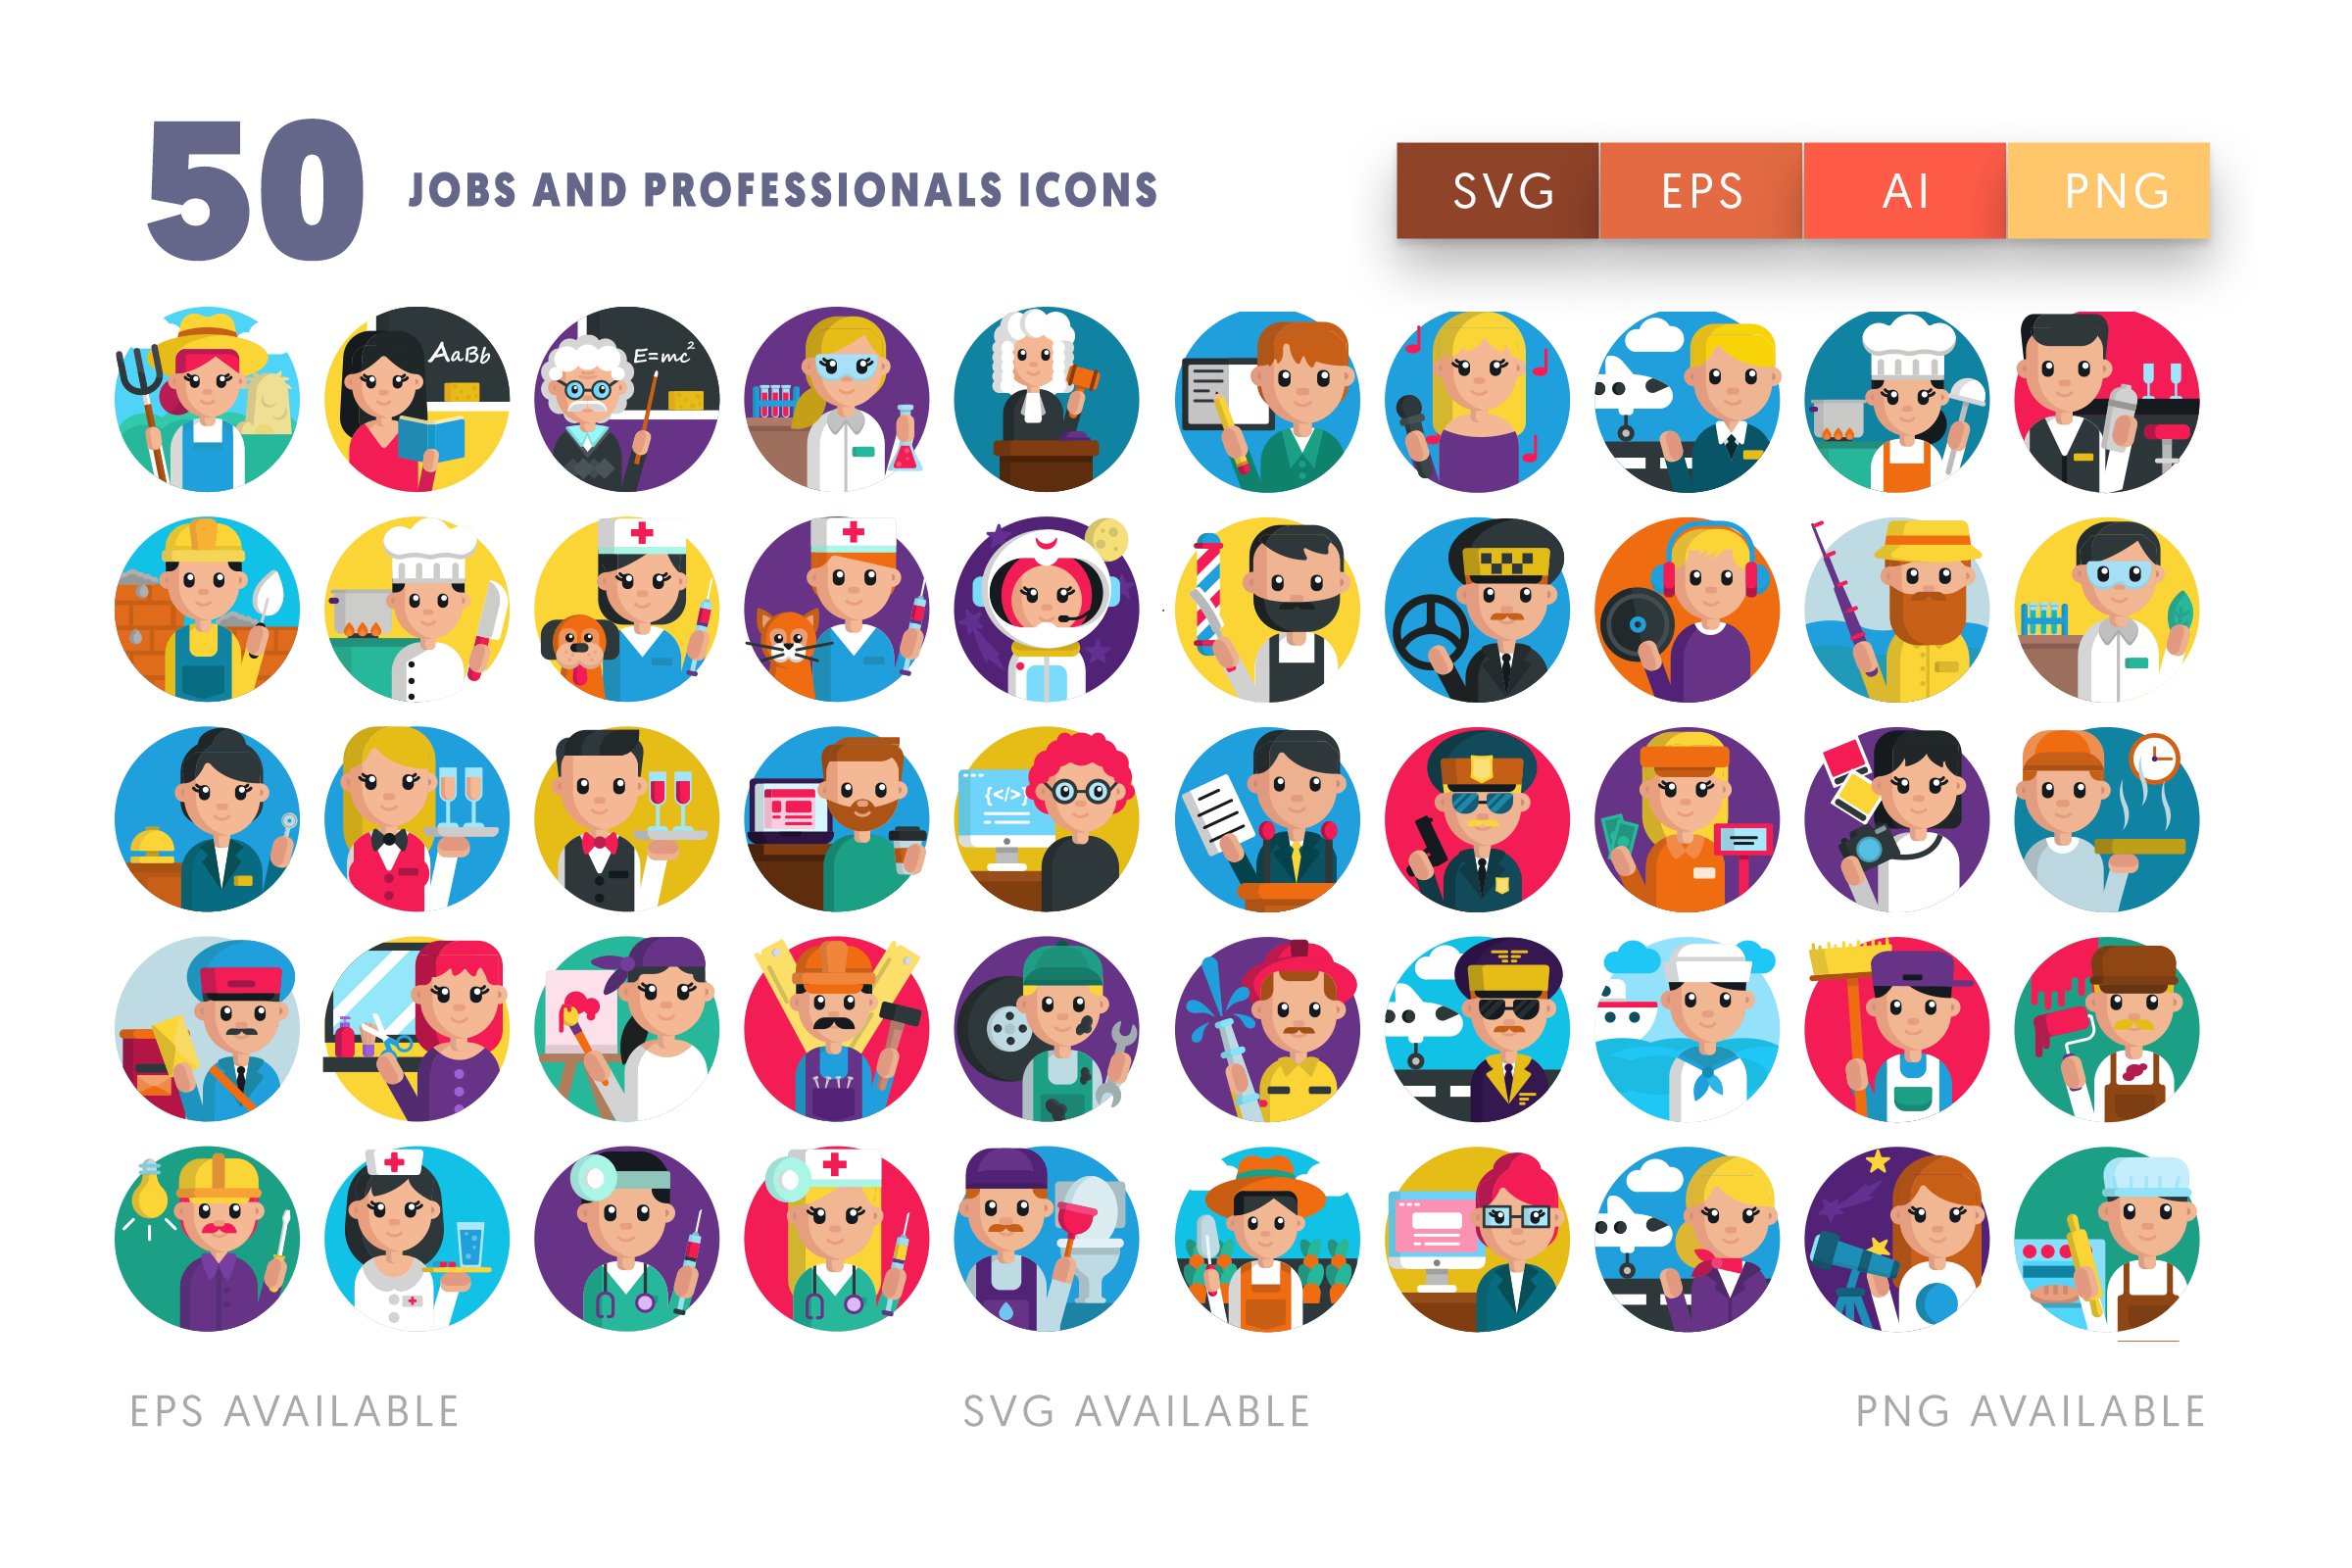 50 Job and Professionals Icons preview image.